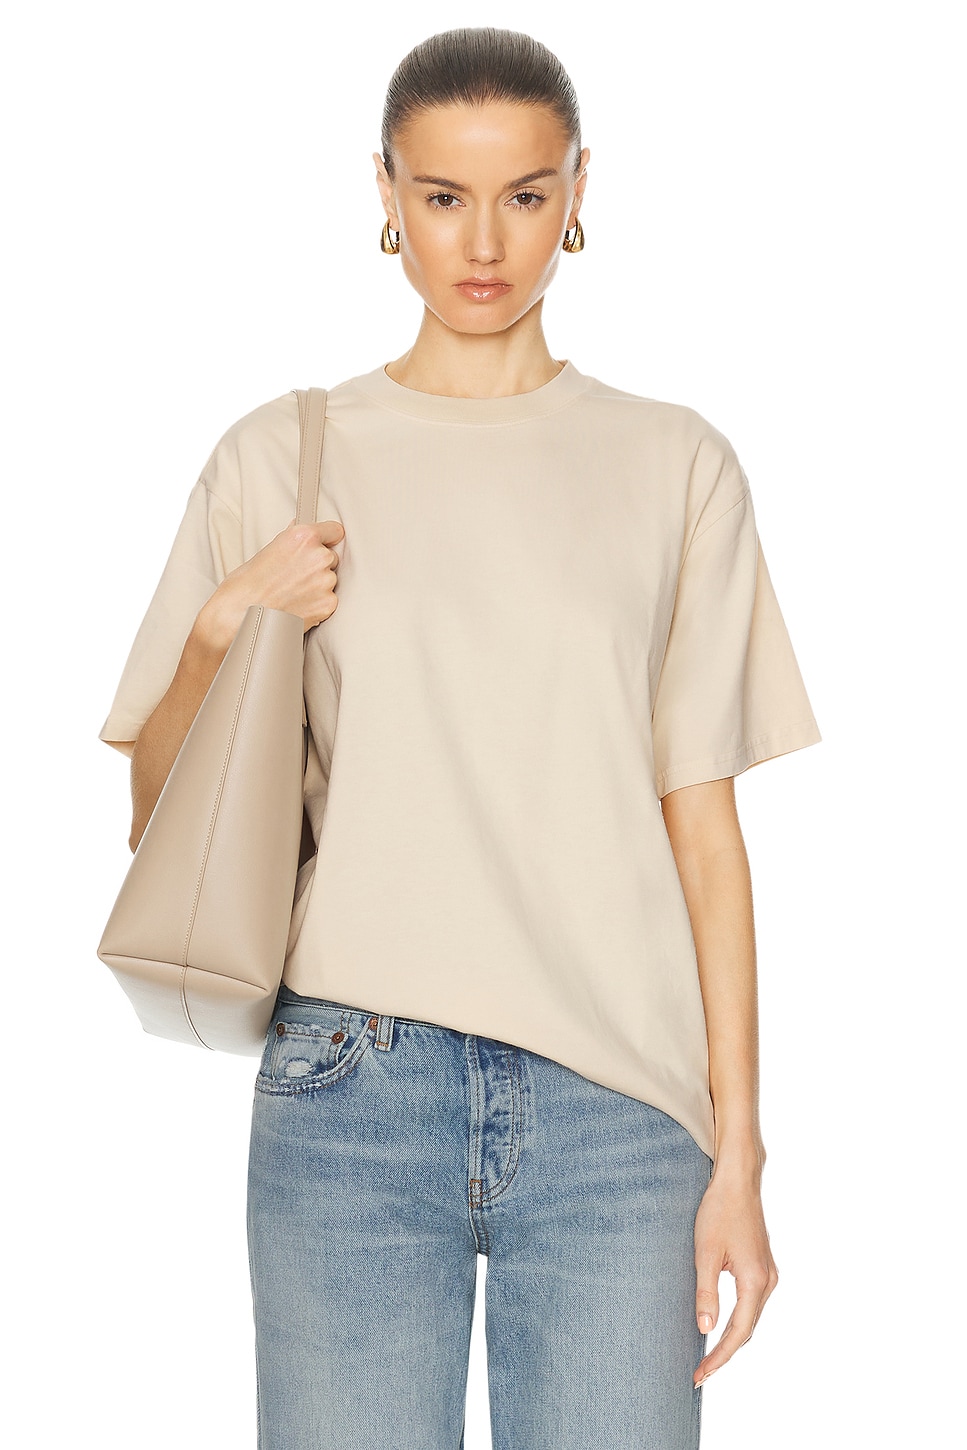 Image 1 of WAO The Relaxed Tee in Natural